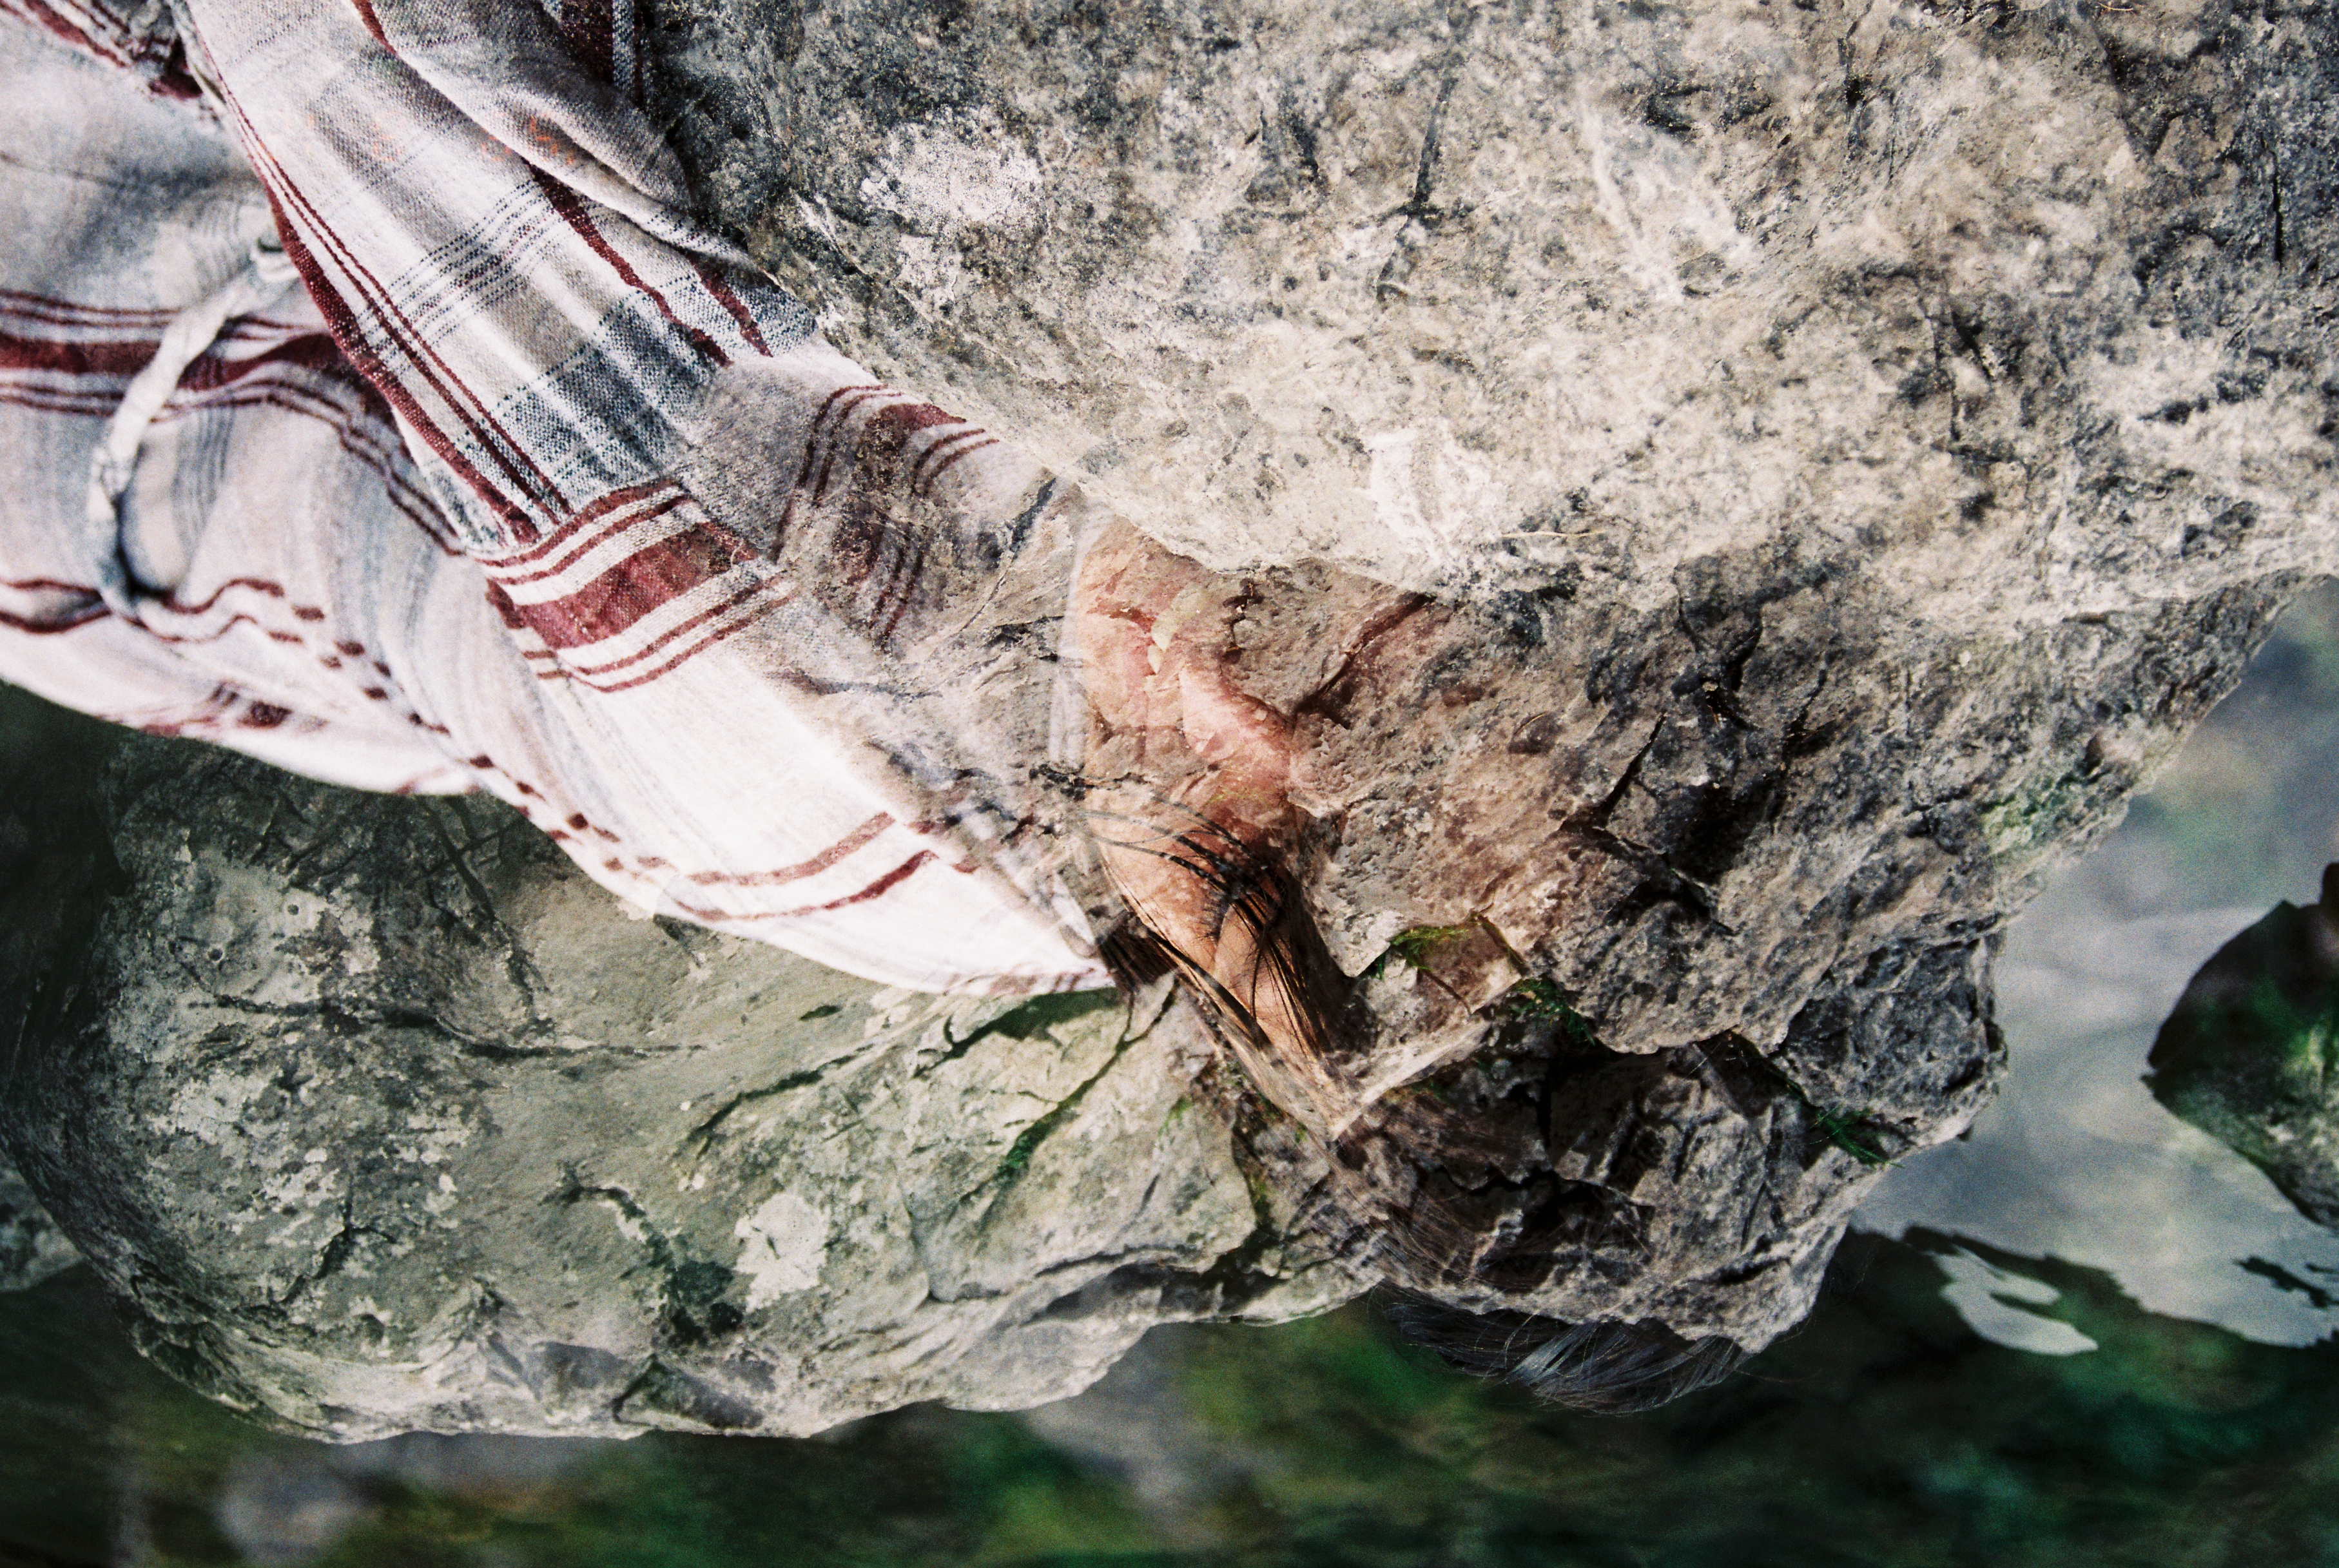 A double exposure of smiling person wearing a plaid shirt who is blending into a bed of rocks.